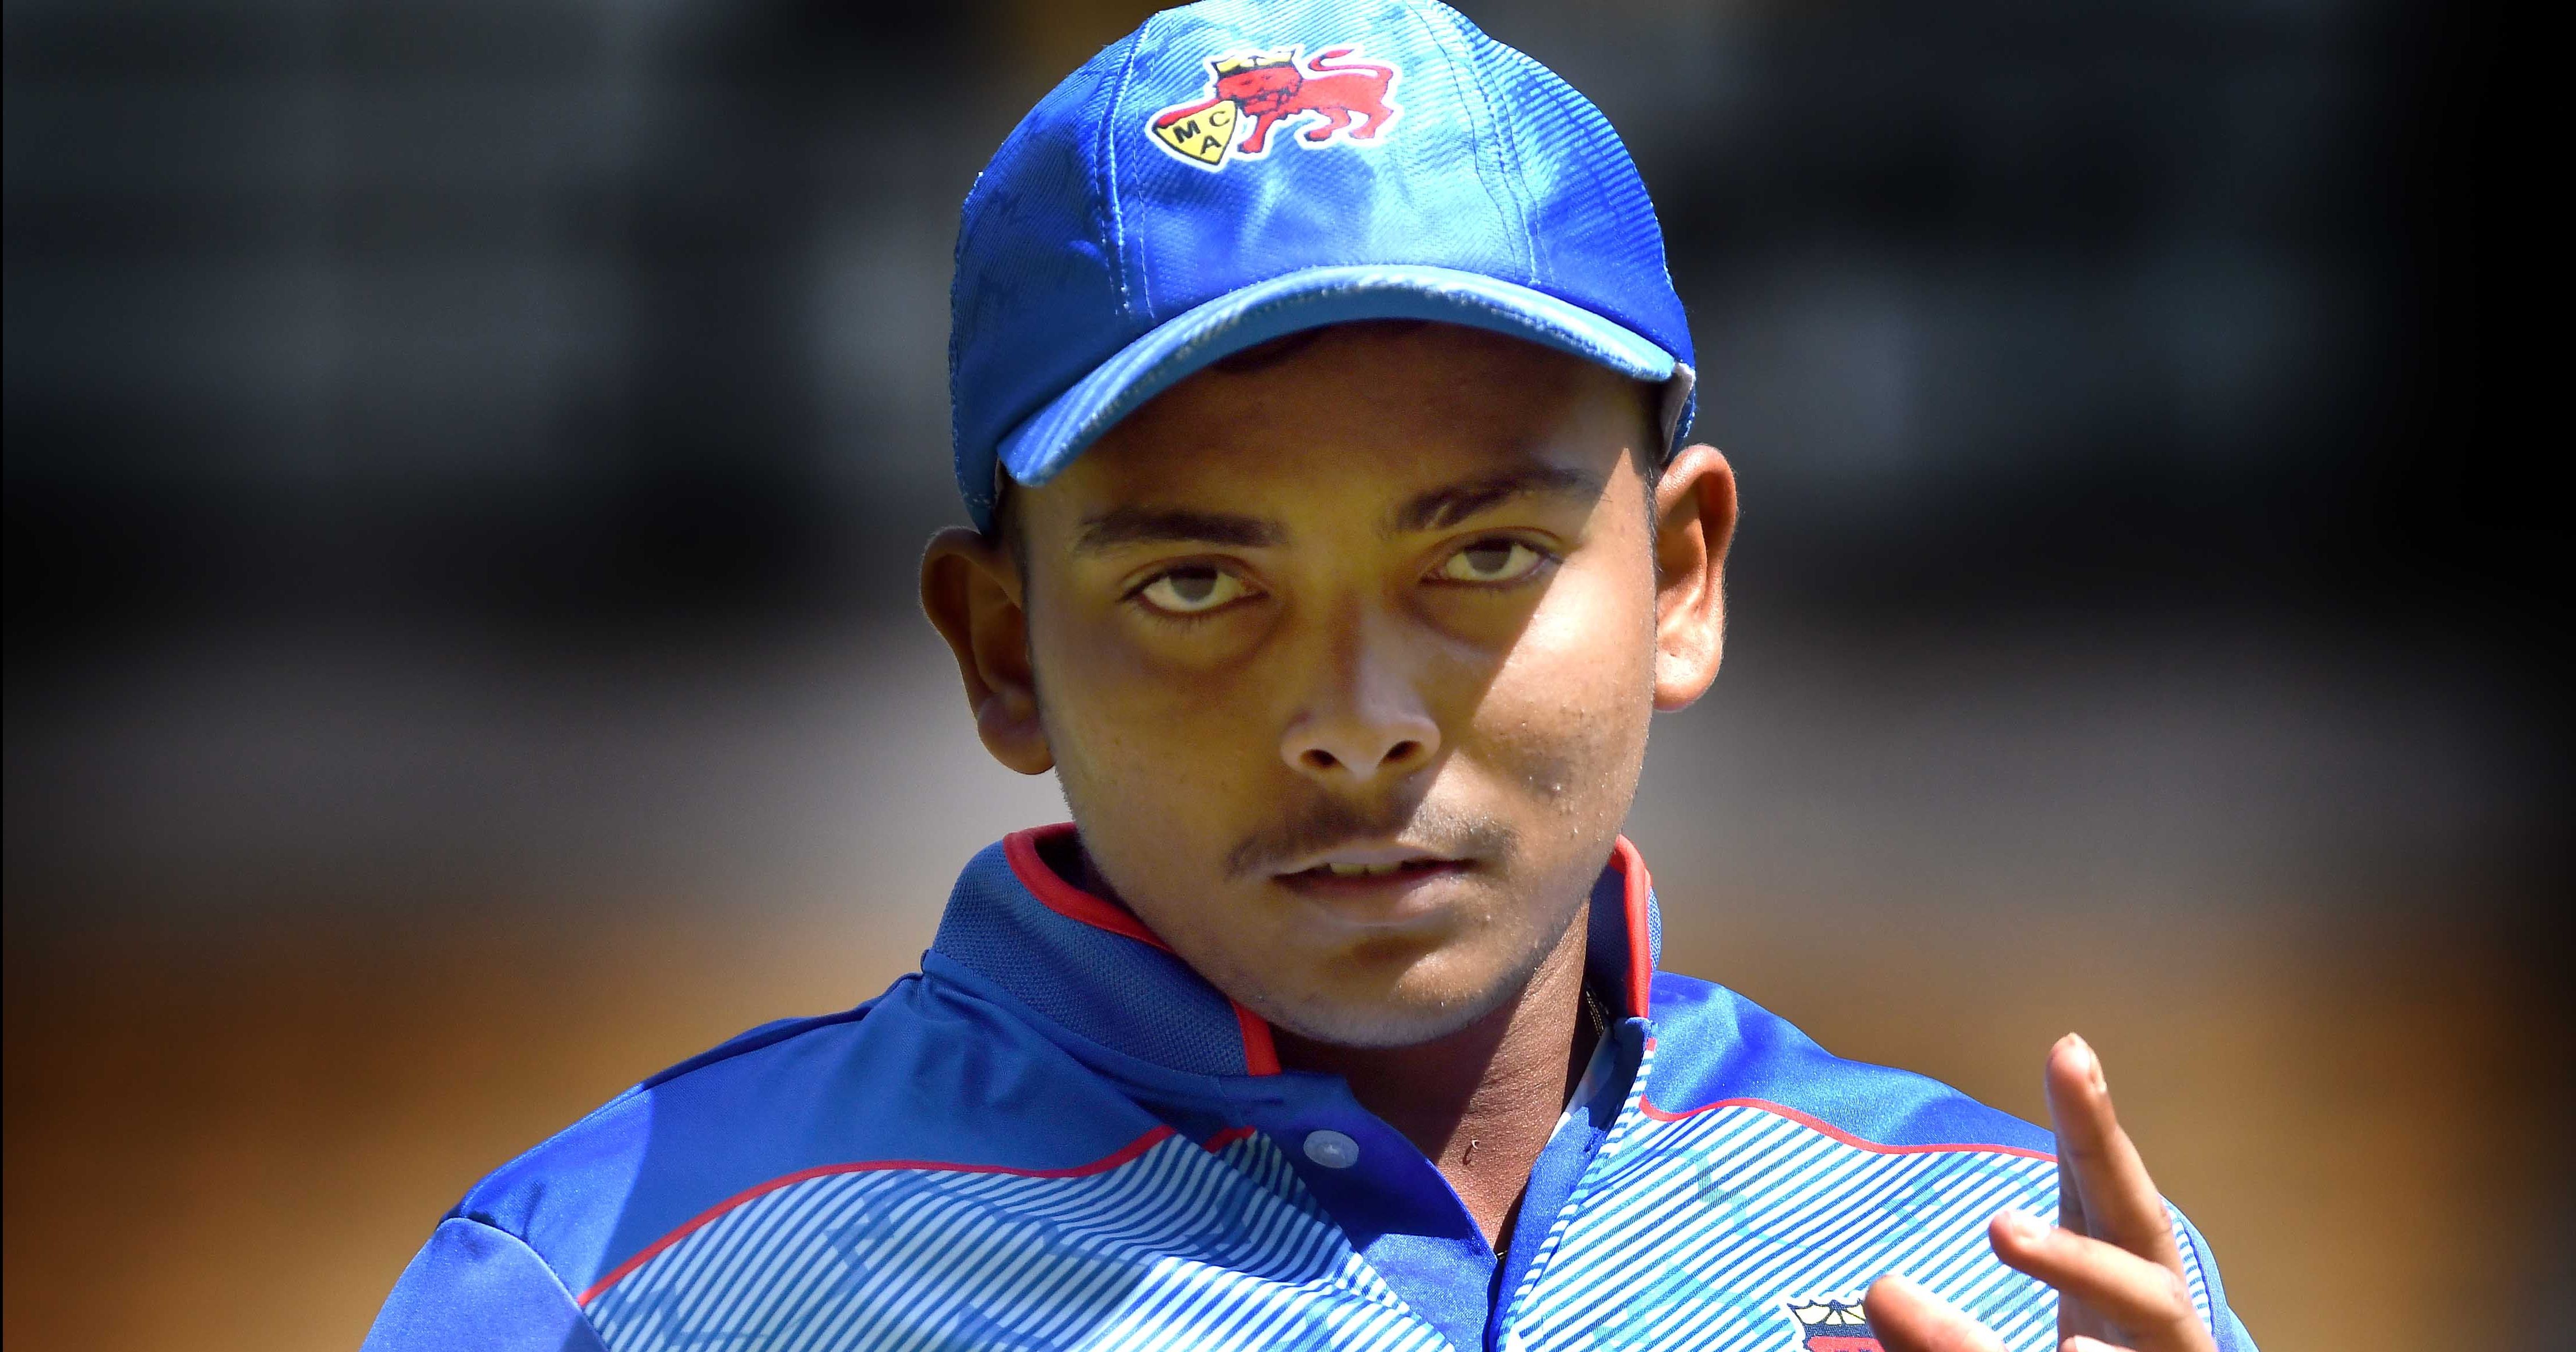 Prithvi Shaw Pays Price For Banned Substance In His Cough Syrup, Handed